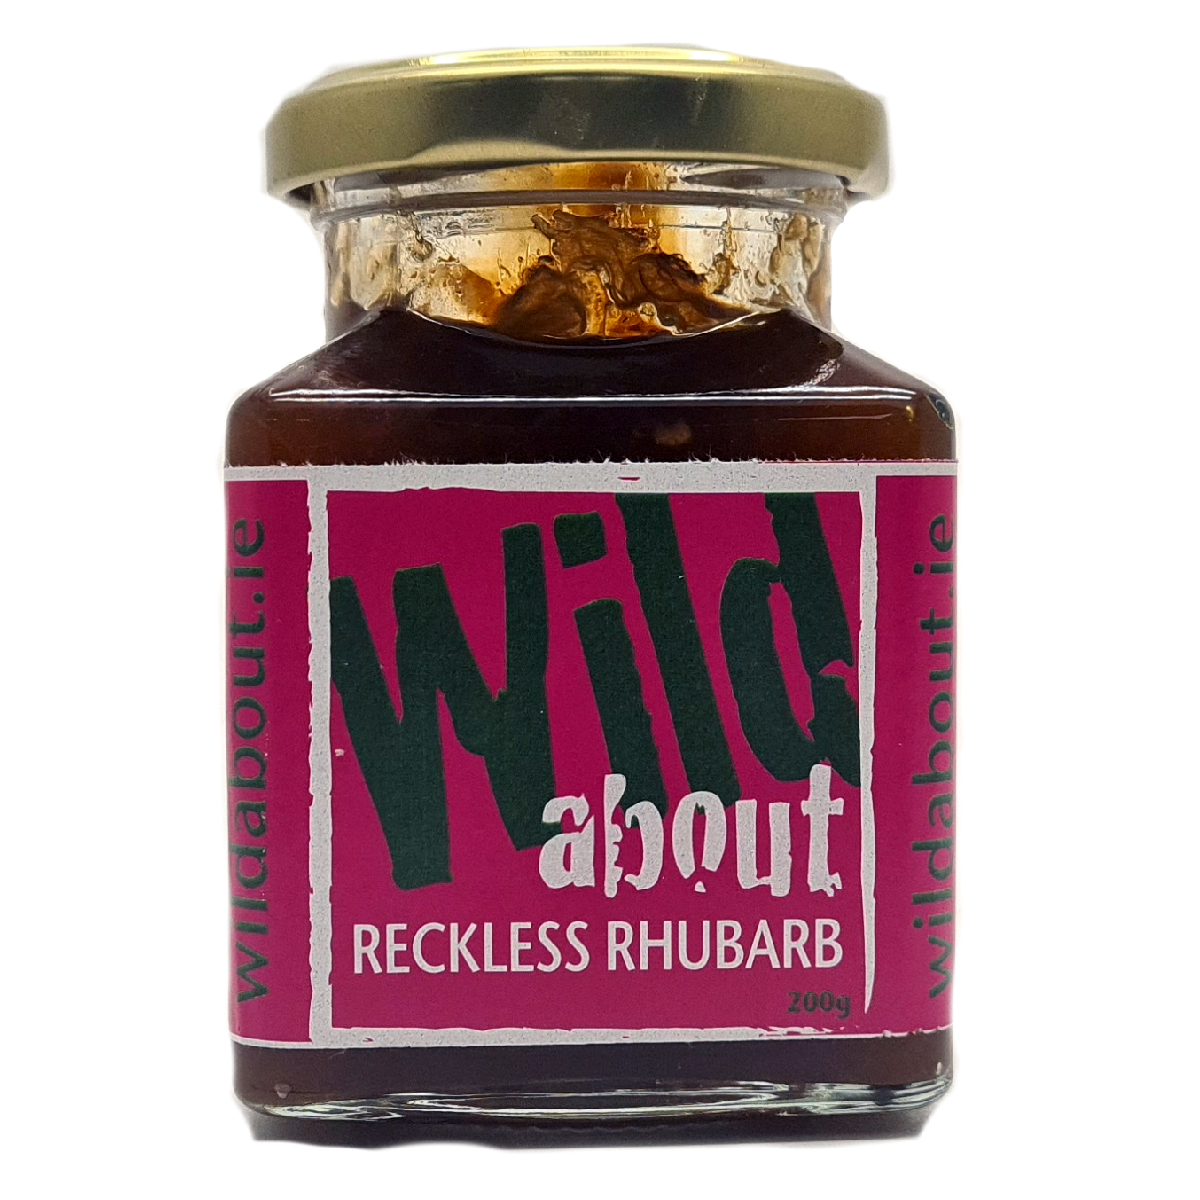 Wild About Reckless Rhubarb 200g